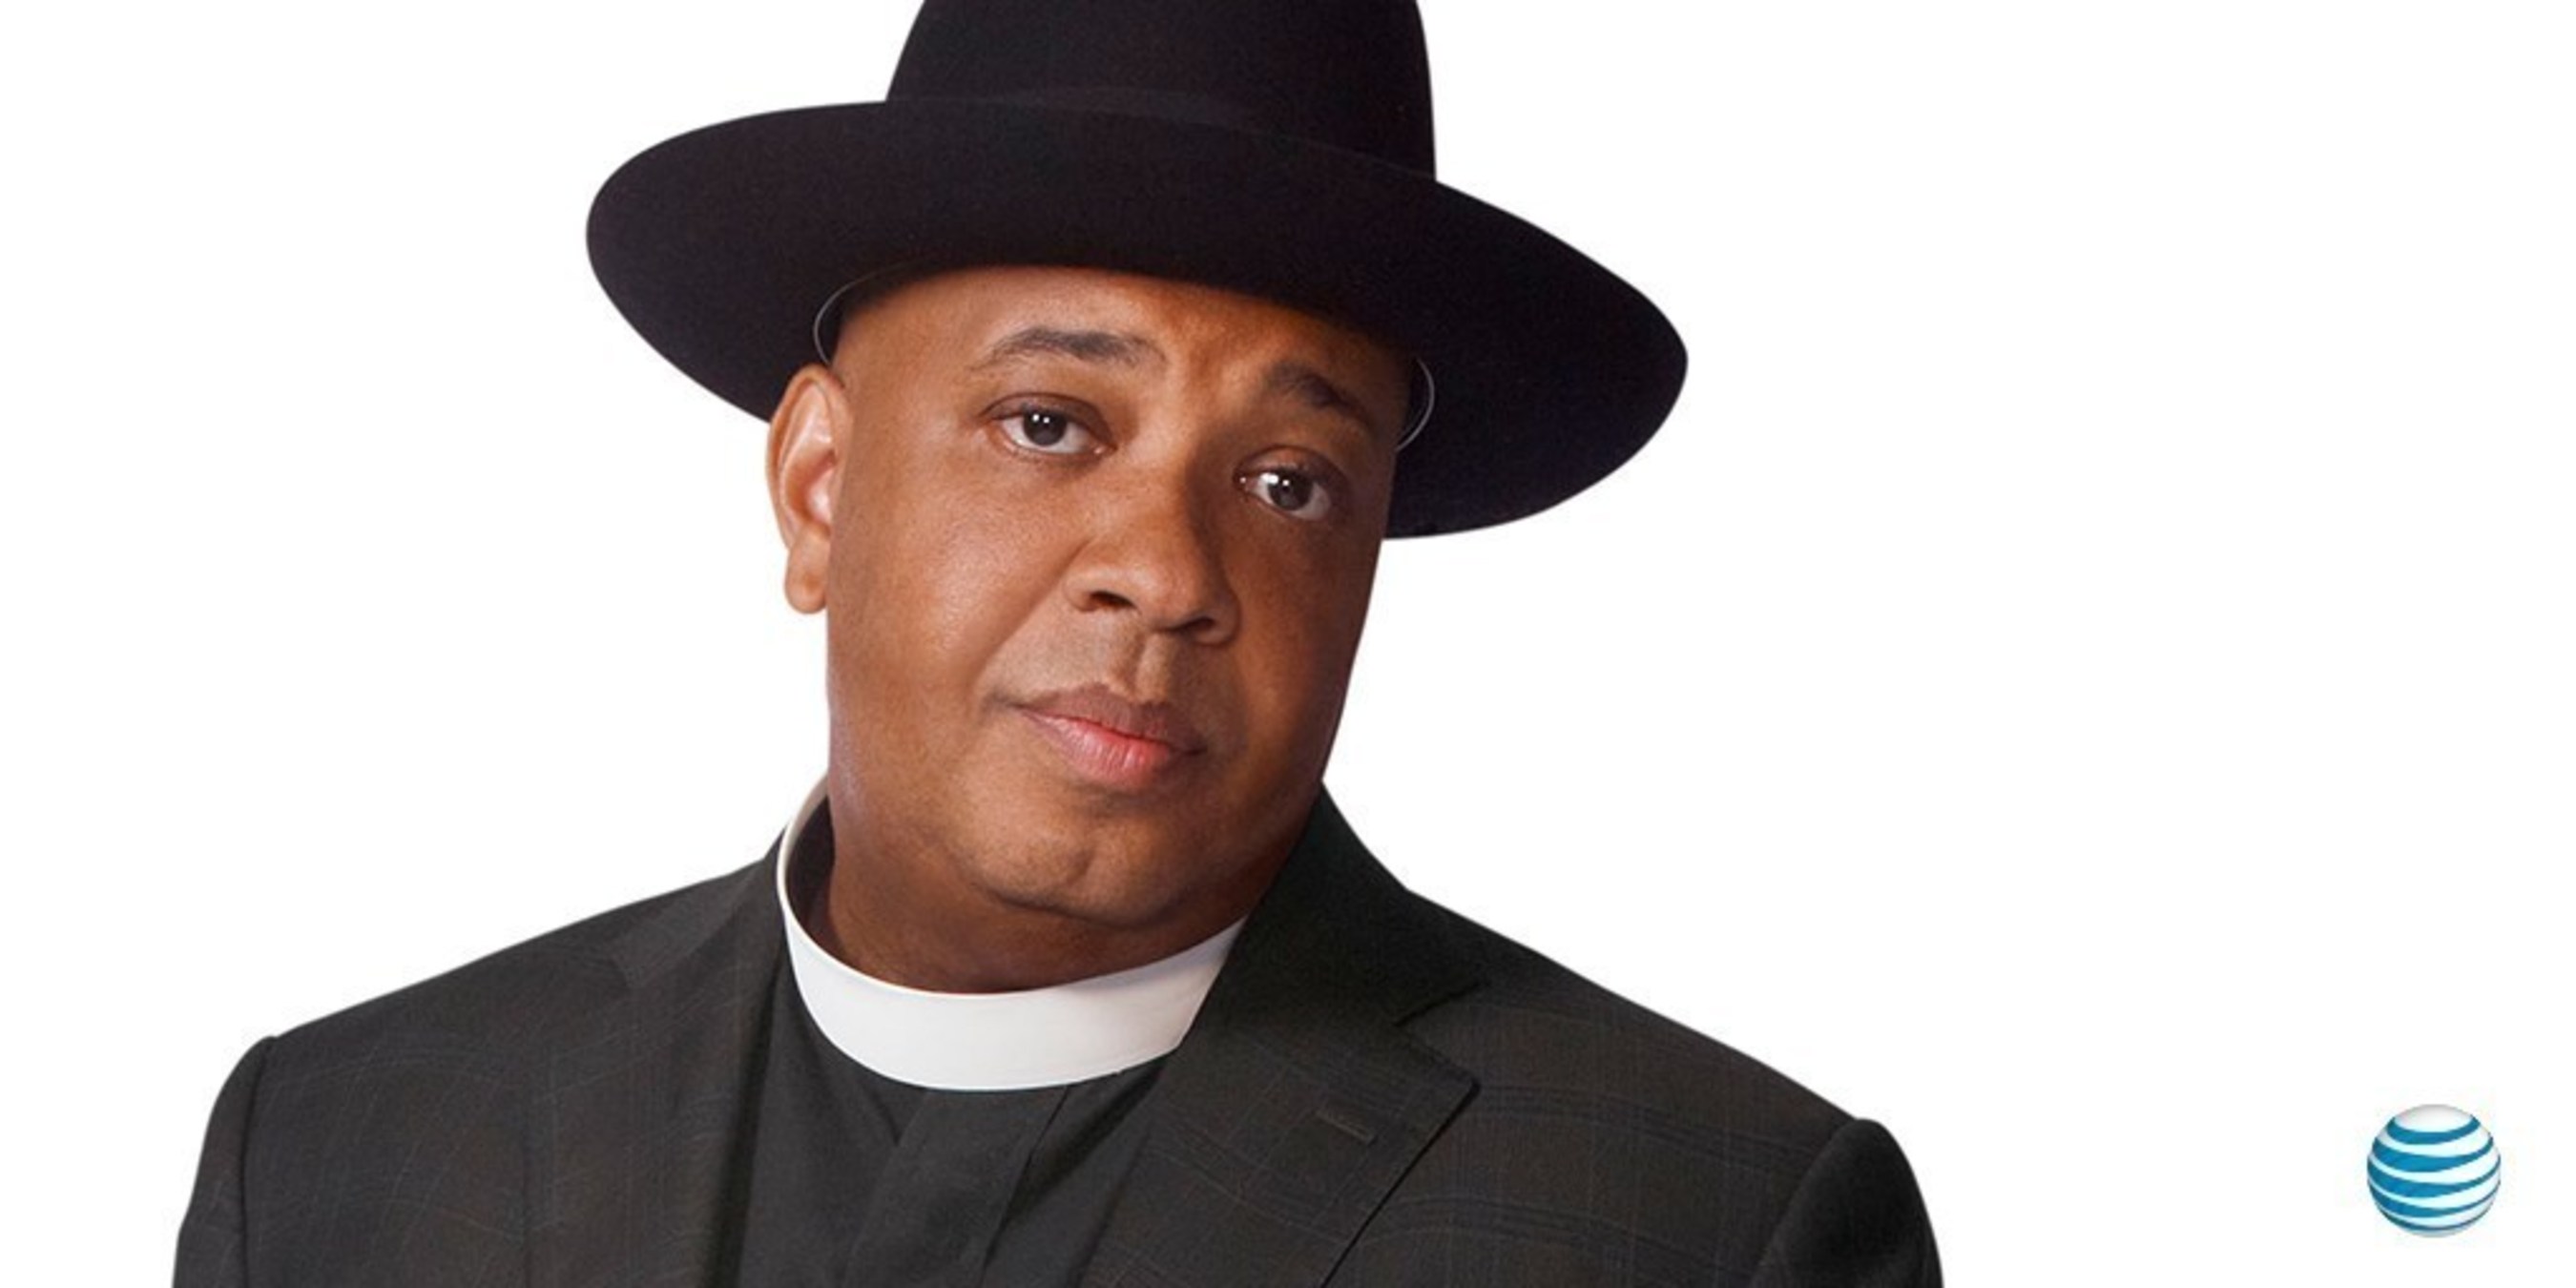 Rev Run hits the radio airwaves with the Inspired Mobility conversation for AT&T.